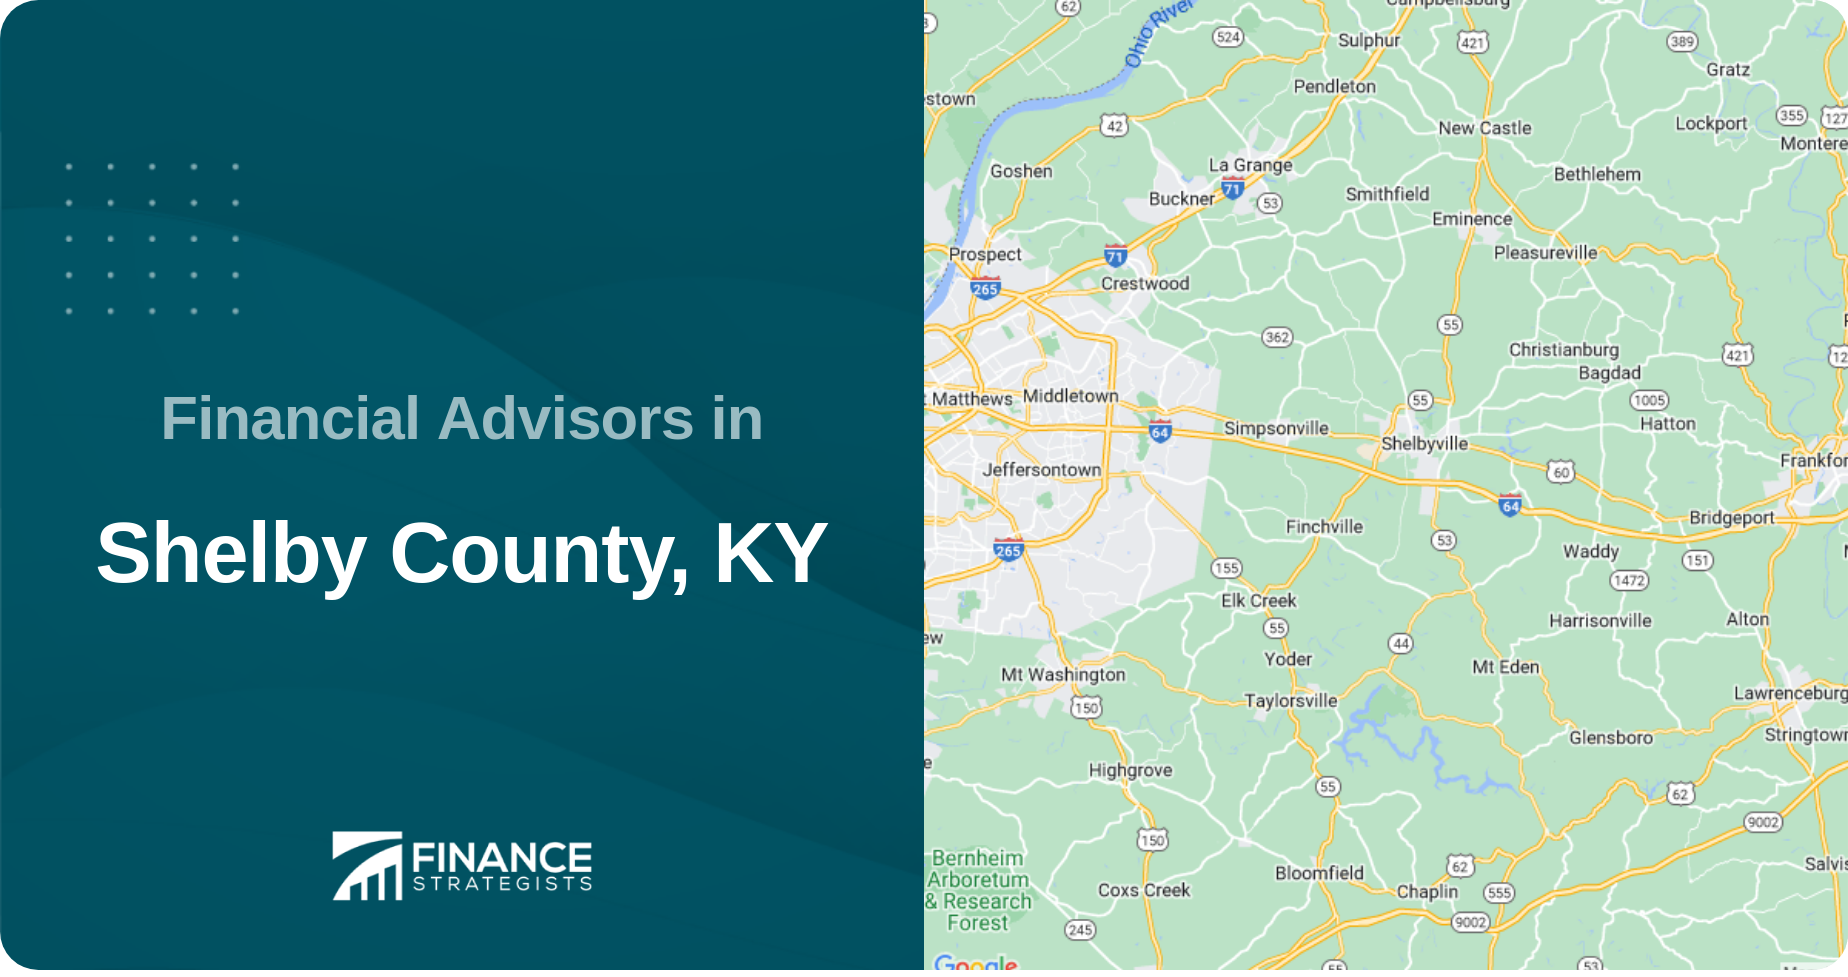 Financial Advisors in Shelby County, KY